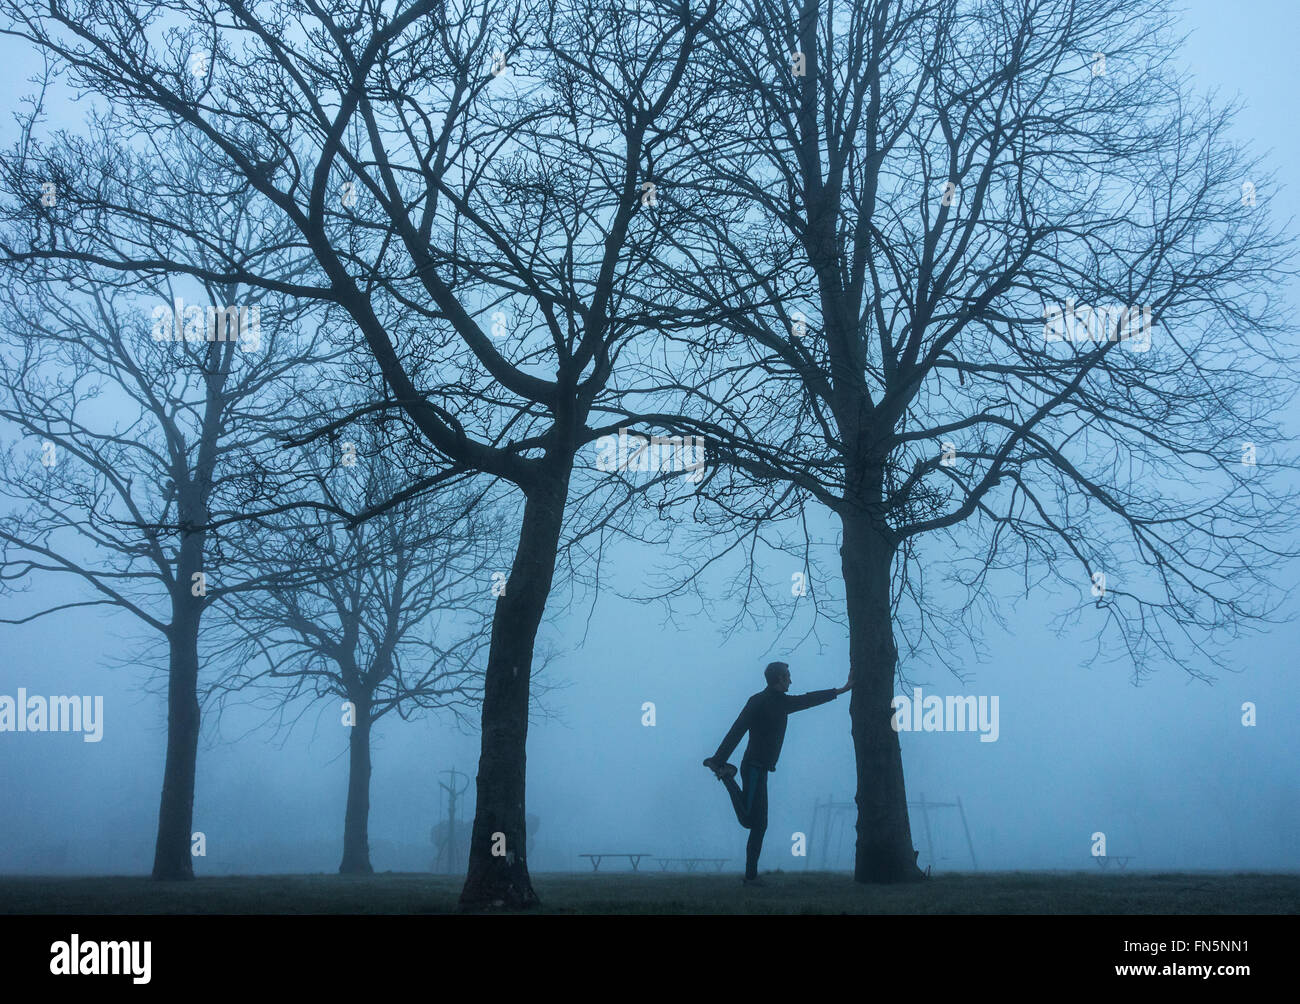 Billingham, north east England, UK, 14th March 2016. Weather: An almost monochrome Monday as a jogger stretches in Whitefield park in pre dawn light on a foggy Monday morning in Billingham, north east England. Credit:  Alan Dawson News/Alamy Live News Stock Photo